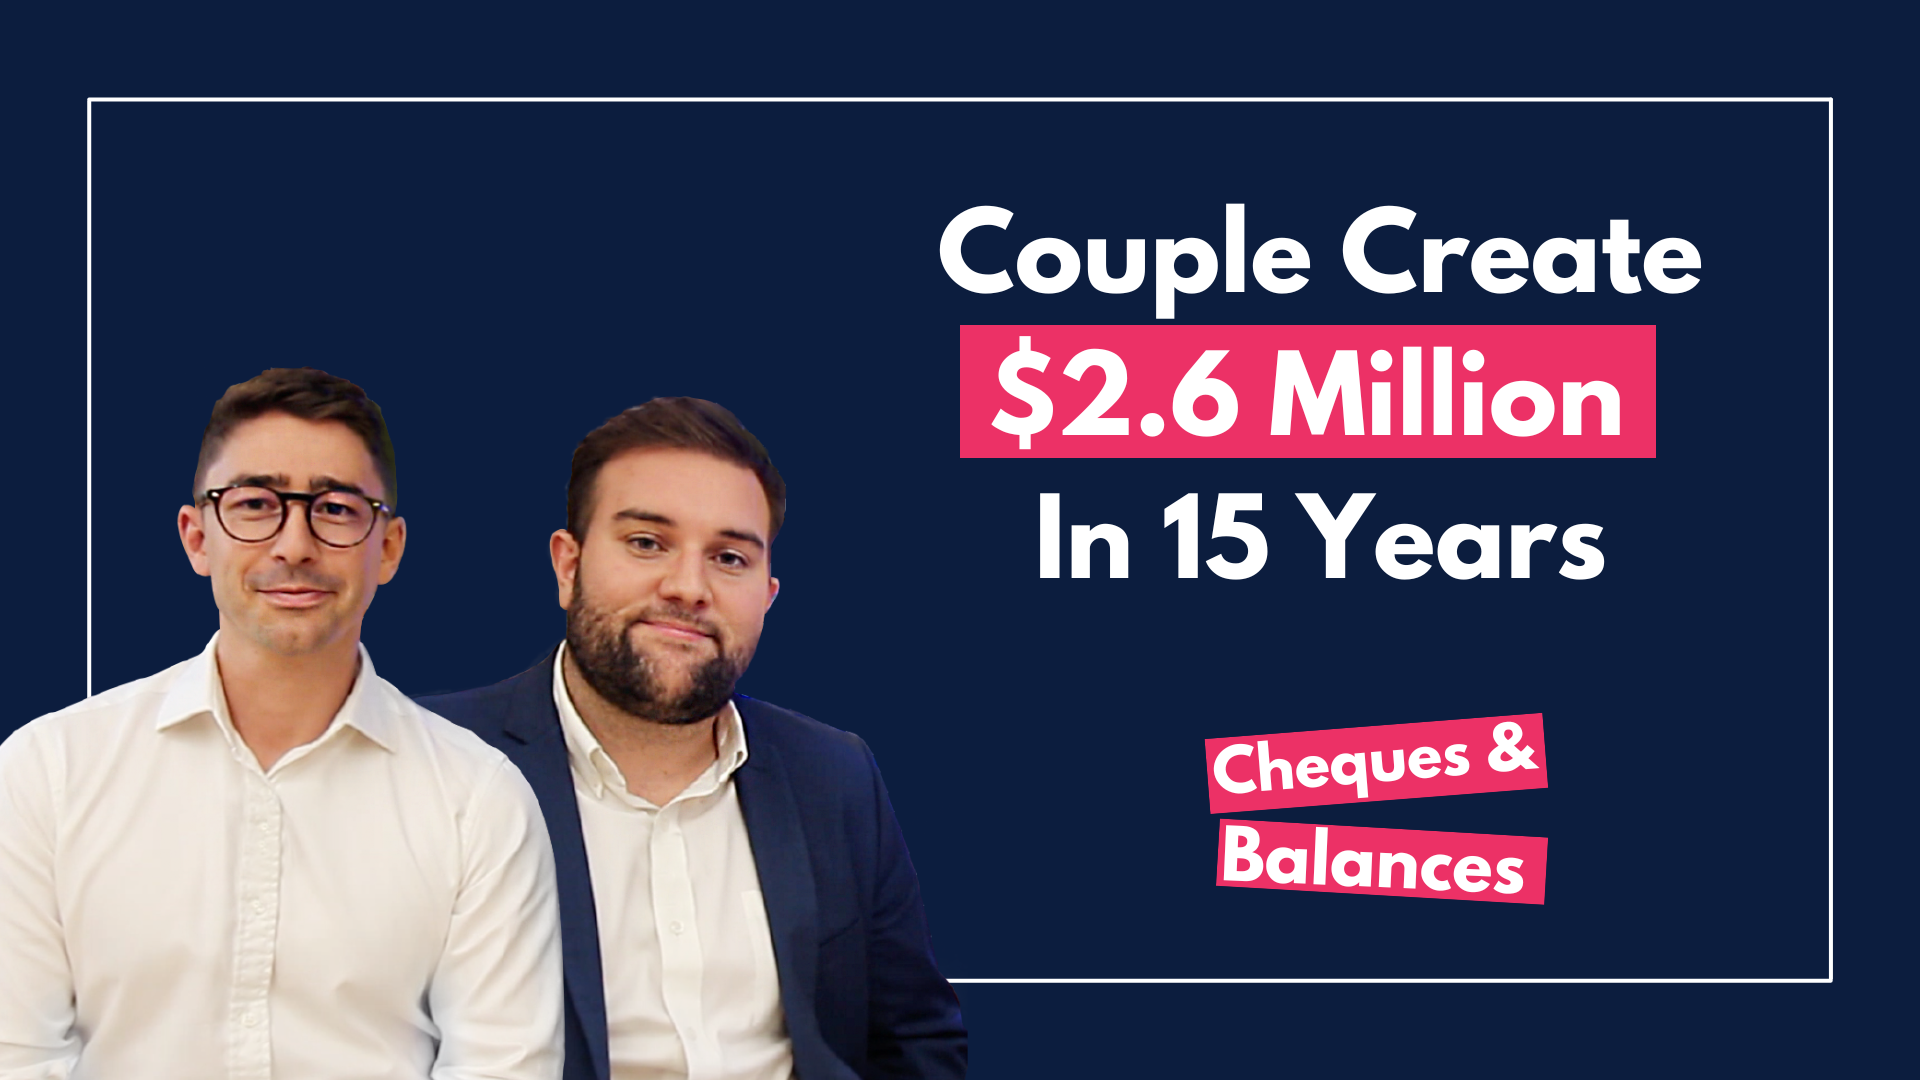 Case Study: Couple Create $2.6 Million In 15 Years – The Sprint